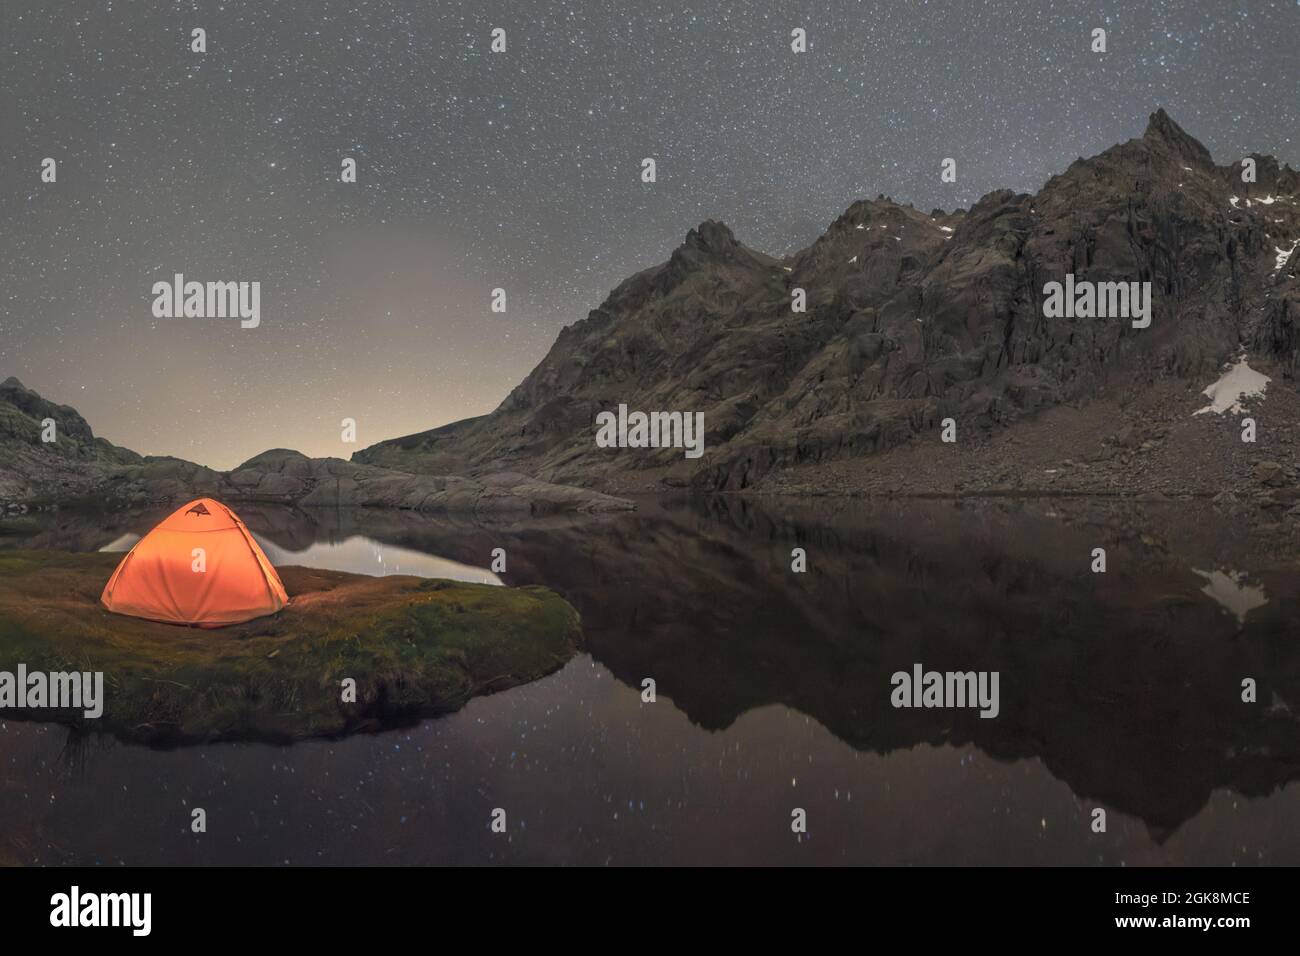 Scenic view of tent on lake shore against snowy mountain under cloudy sky in evening Stock Photo